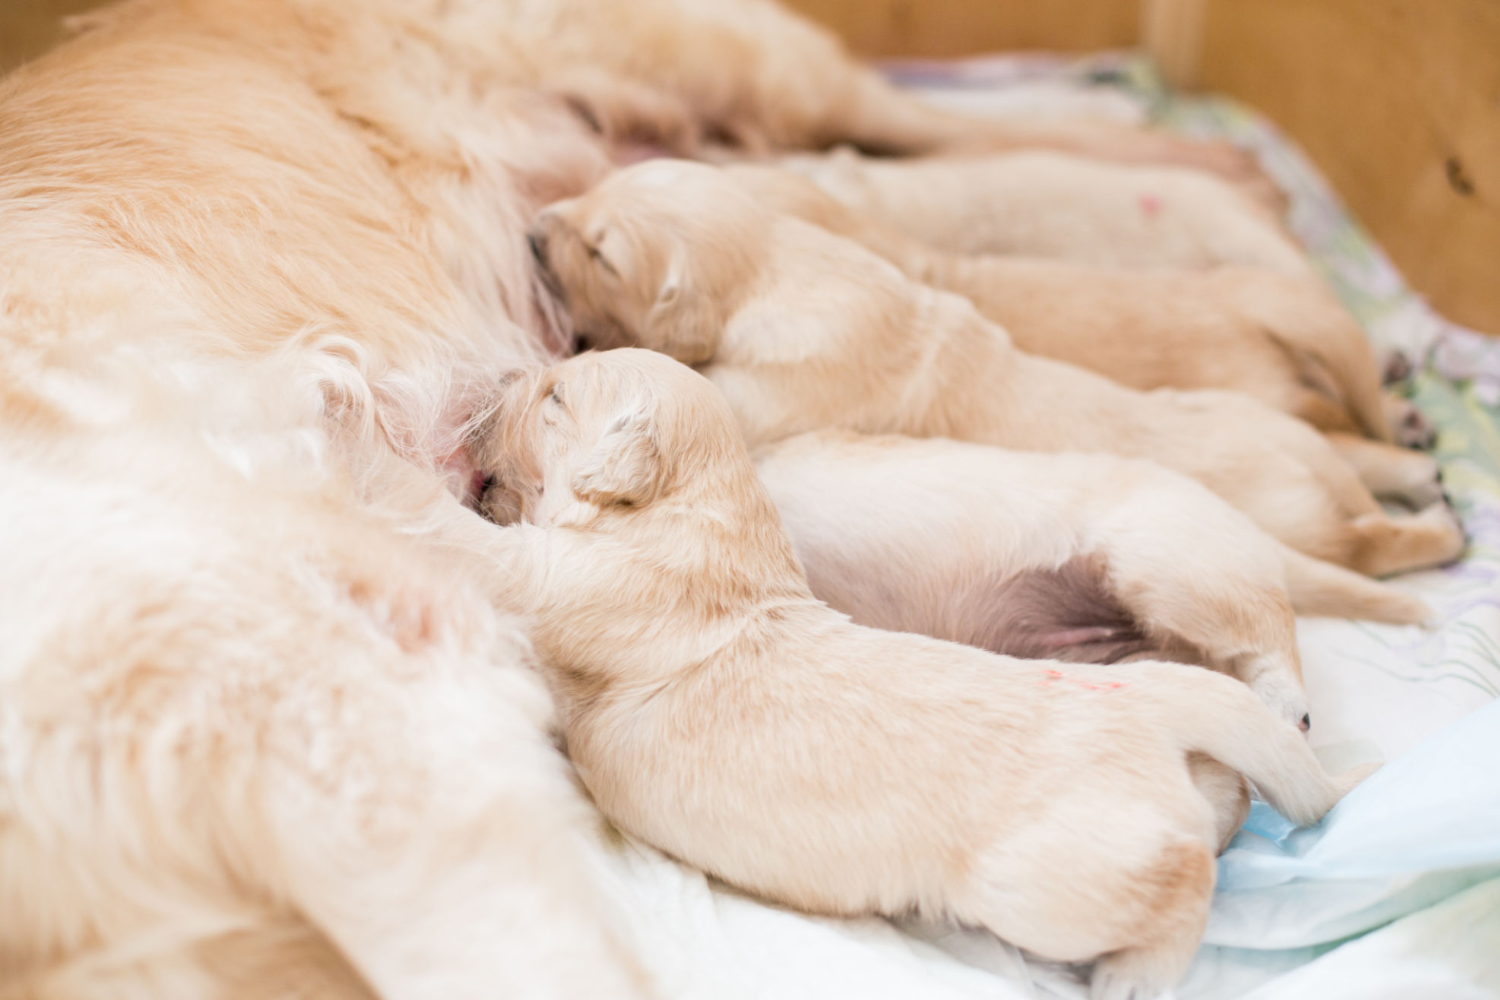 The Top 5 Nutritional Needs of Pregnant and Nursing Dogs